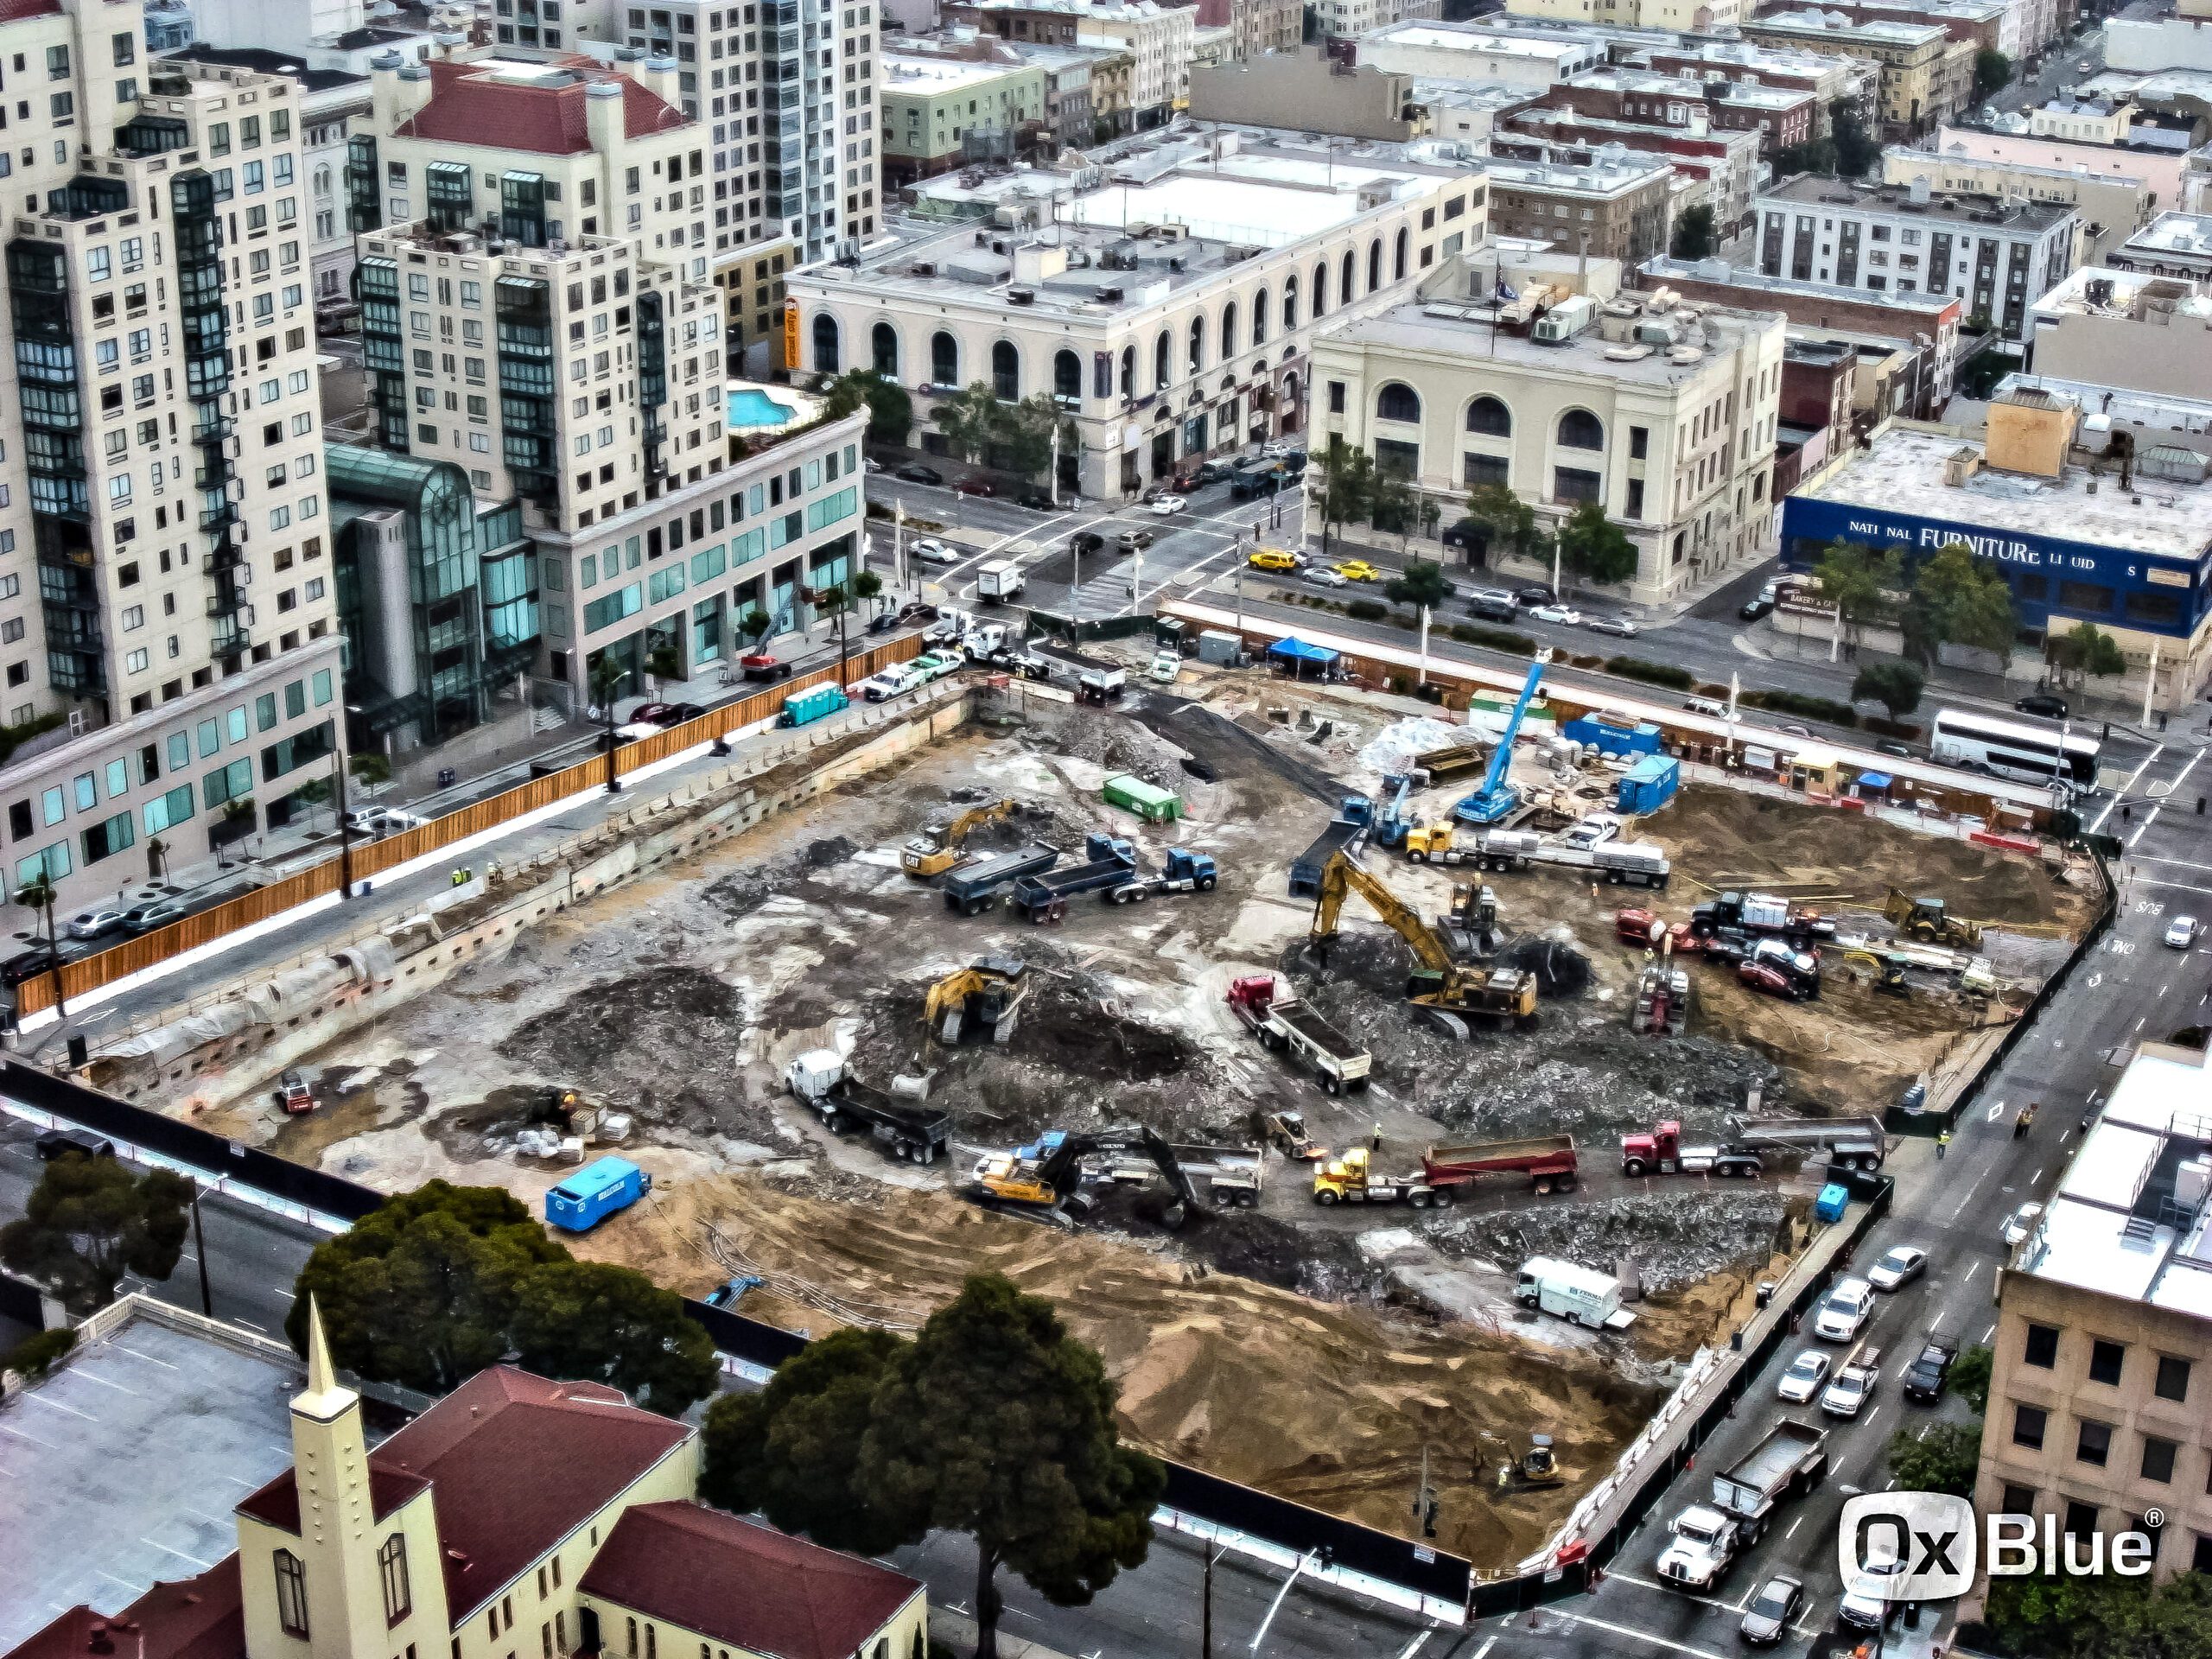 Sutter Health Van Ness Campus Aerial Progress | Van Ness and Geary Campus Hospital aerial